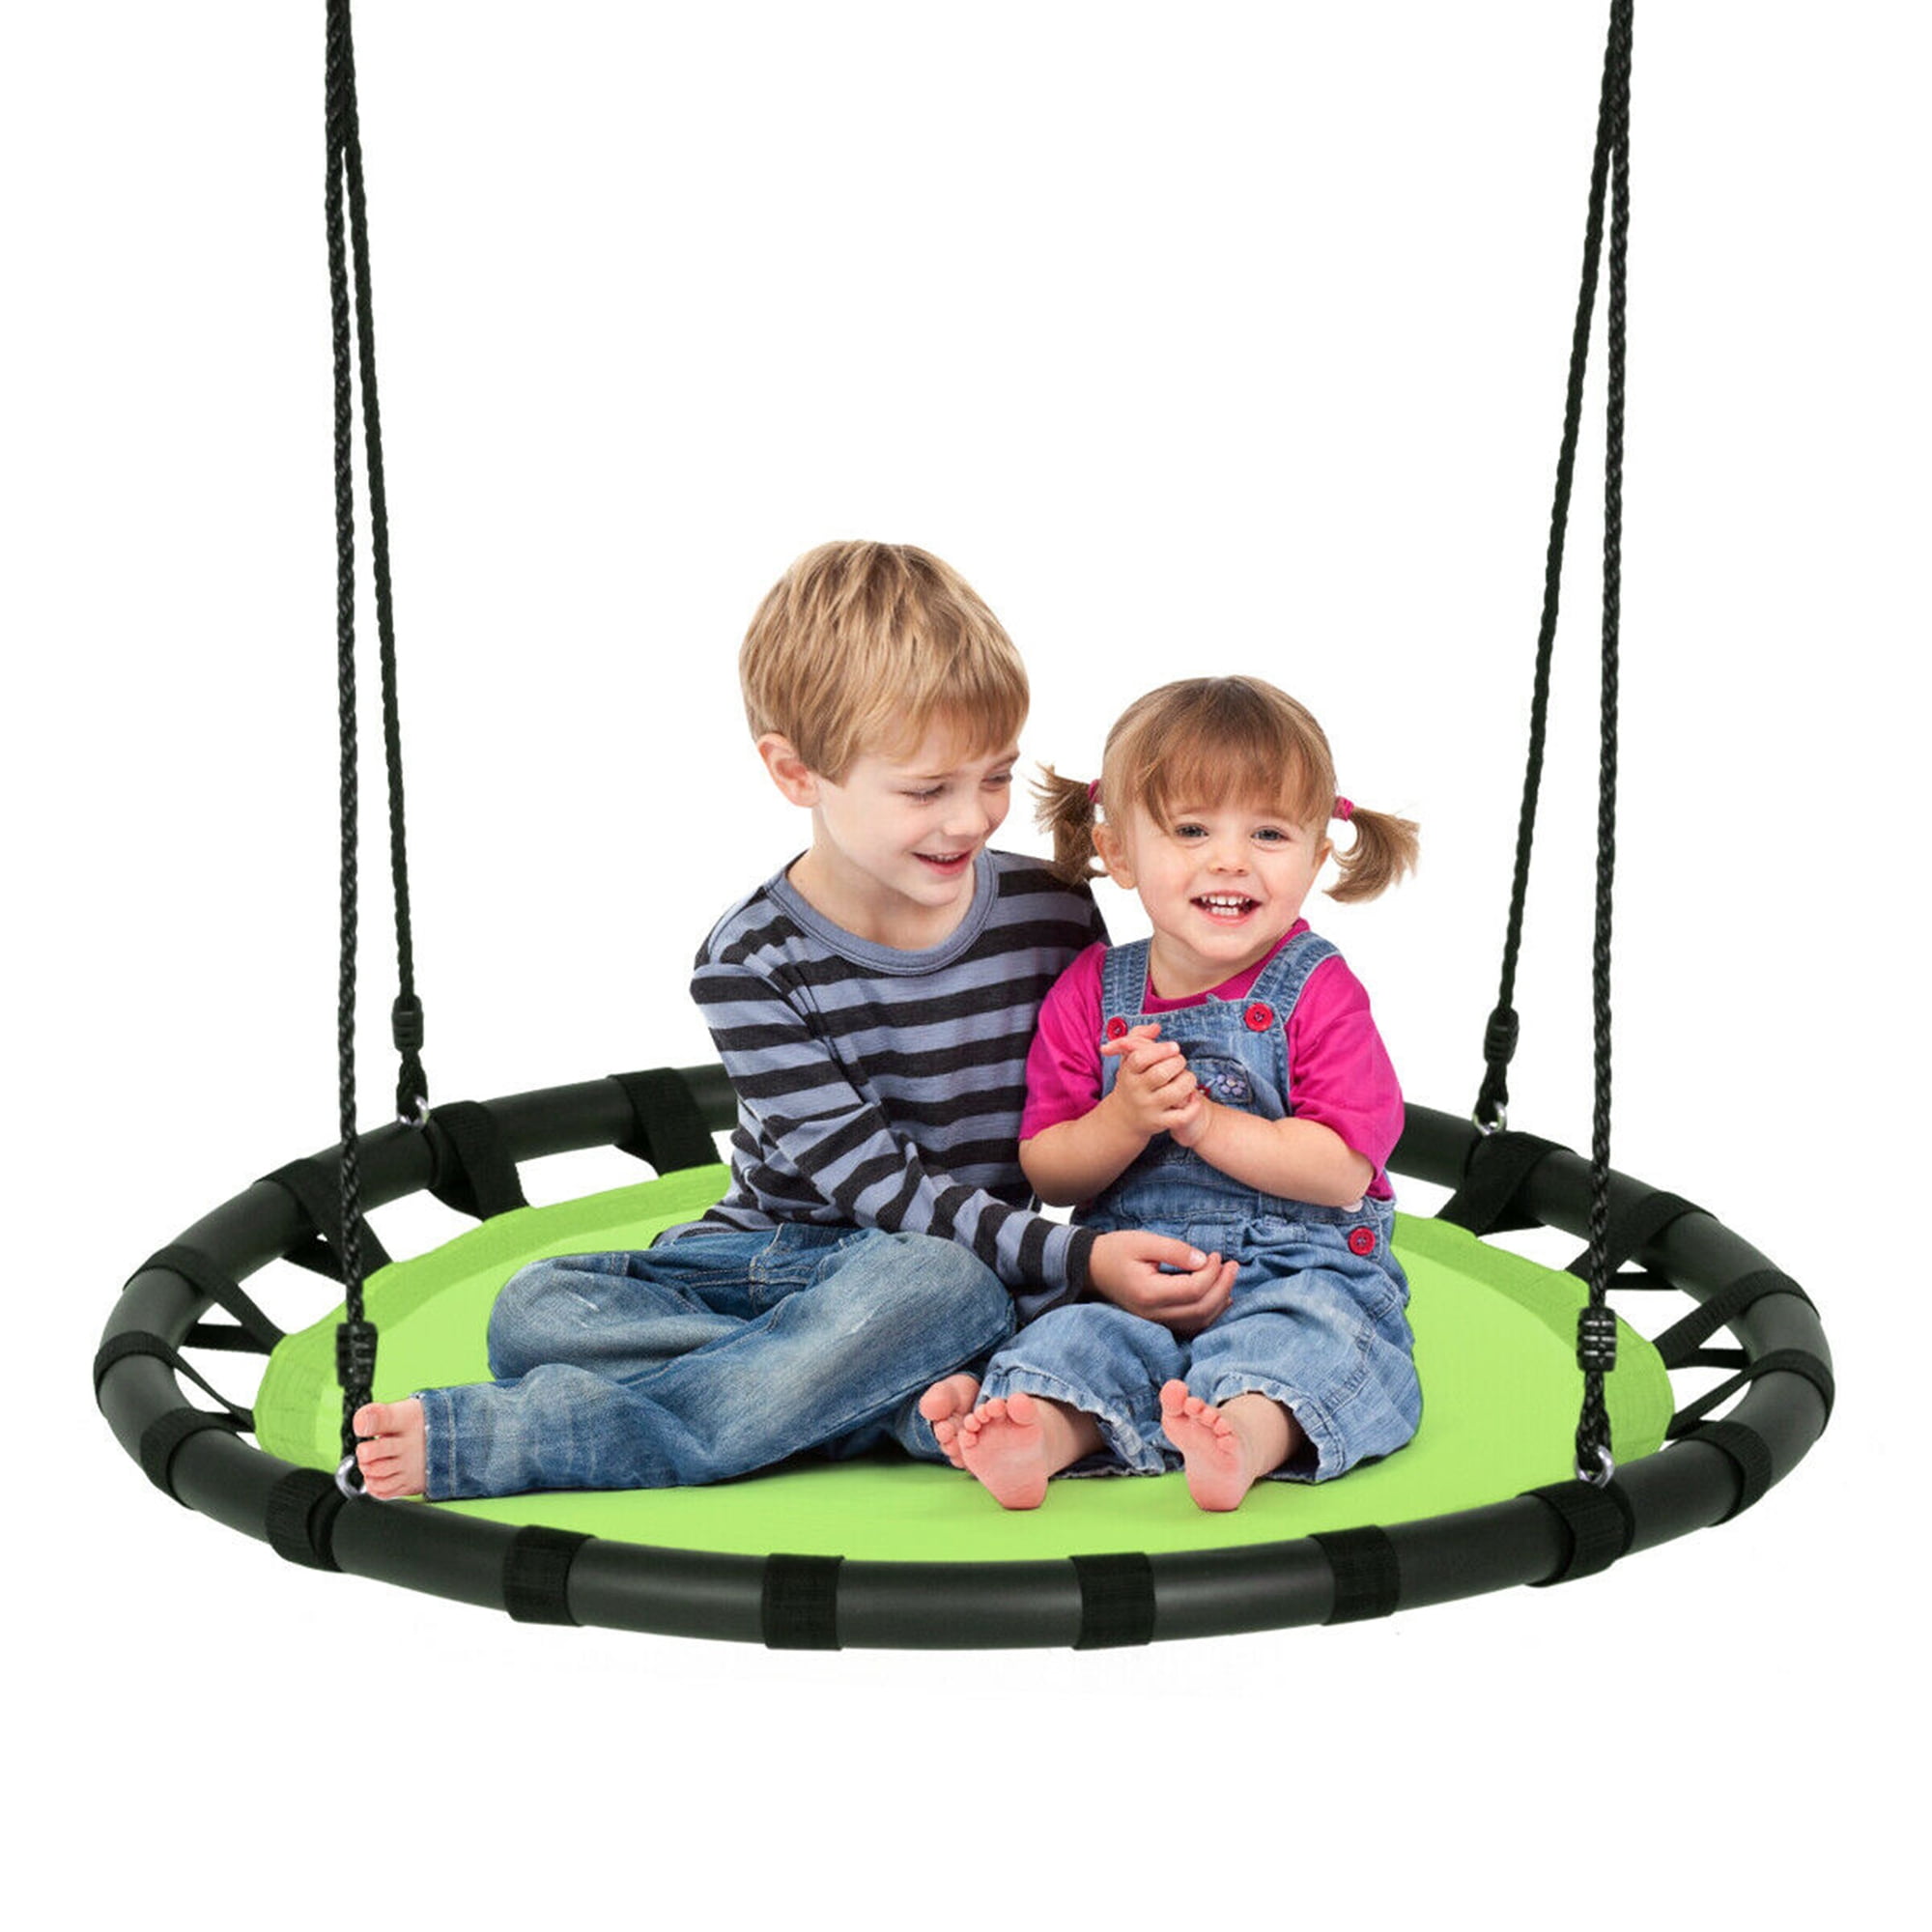 Flying Saucer Tree Swing for Kids ZenMonkey Round 40 Inch Swing Kit 600 lbs Capacity with UV Resistant Textilene 900D Oxford Fabric with 360 Degree Swivel and Hanging Straps Steel Frame 